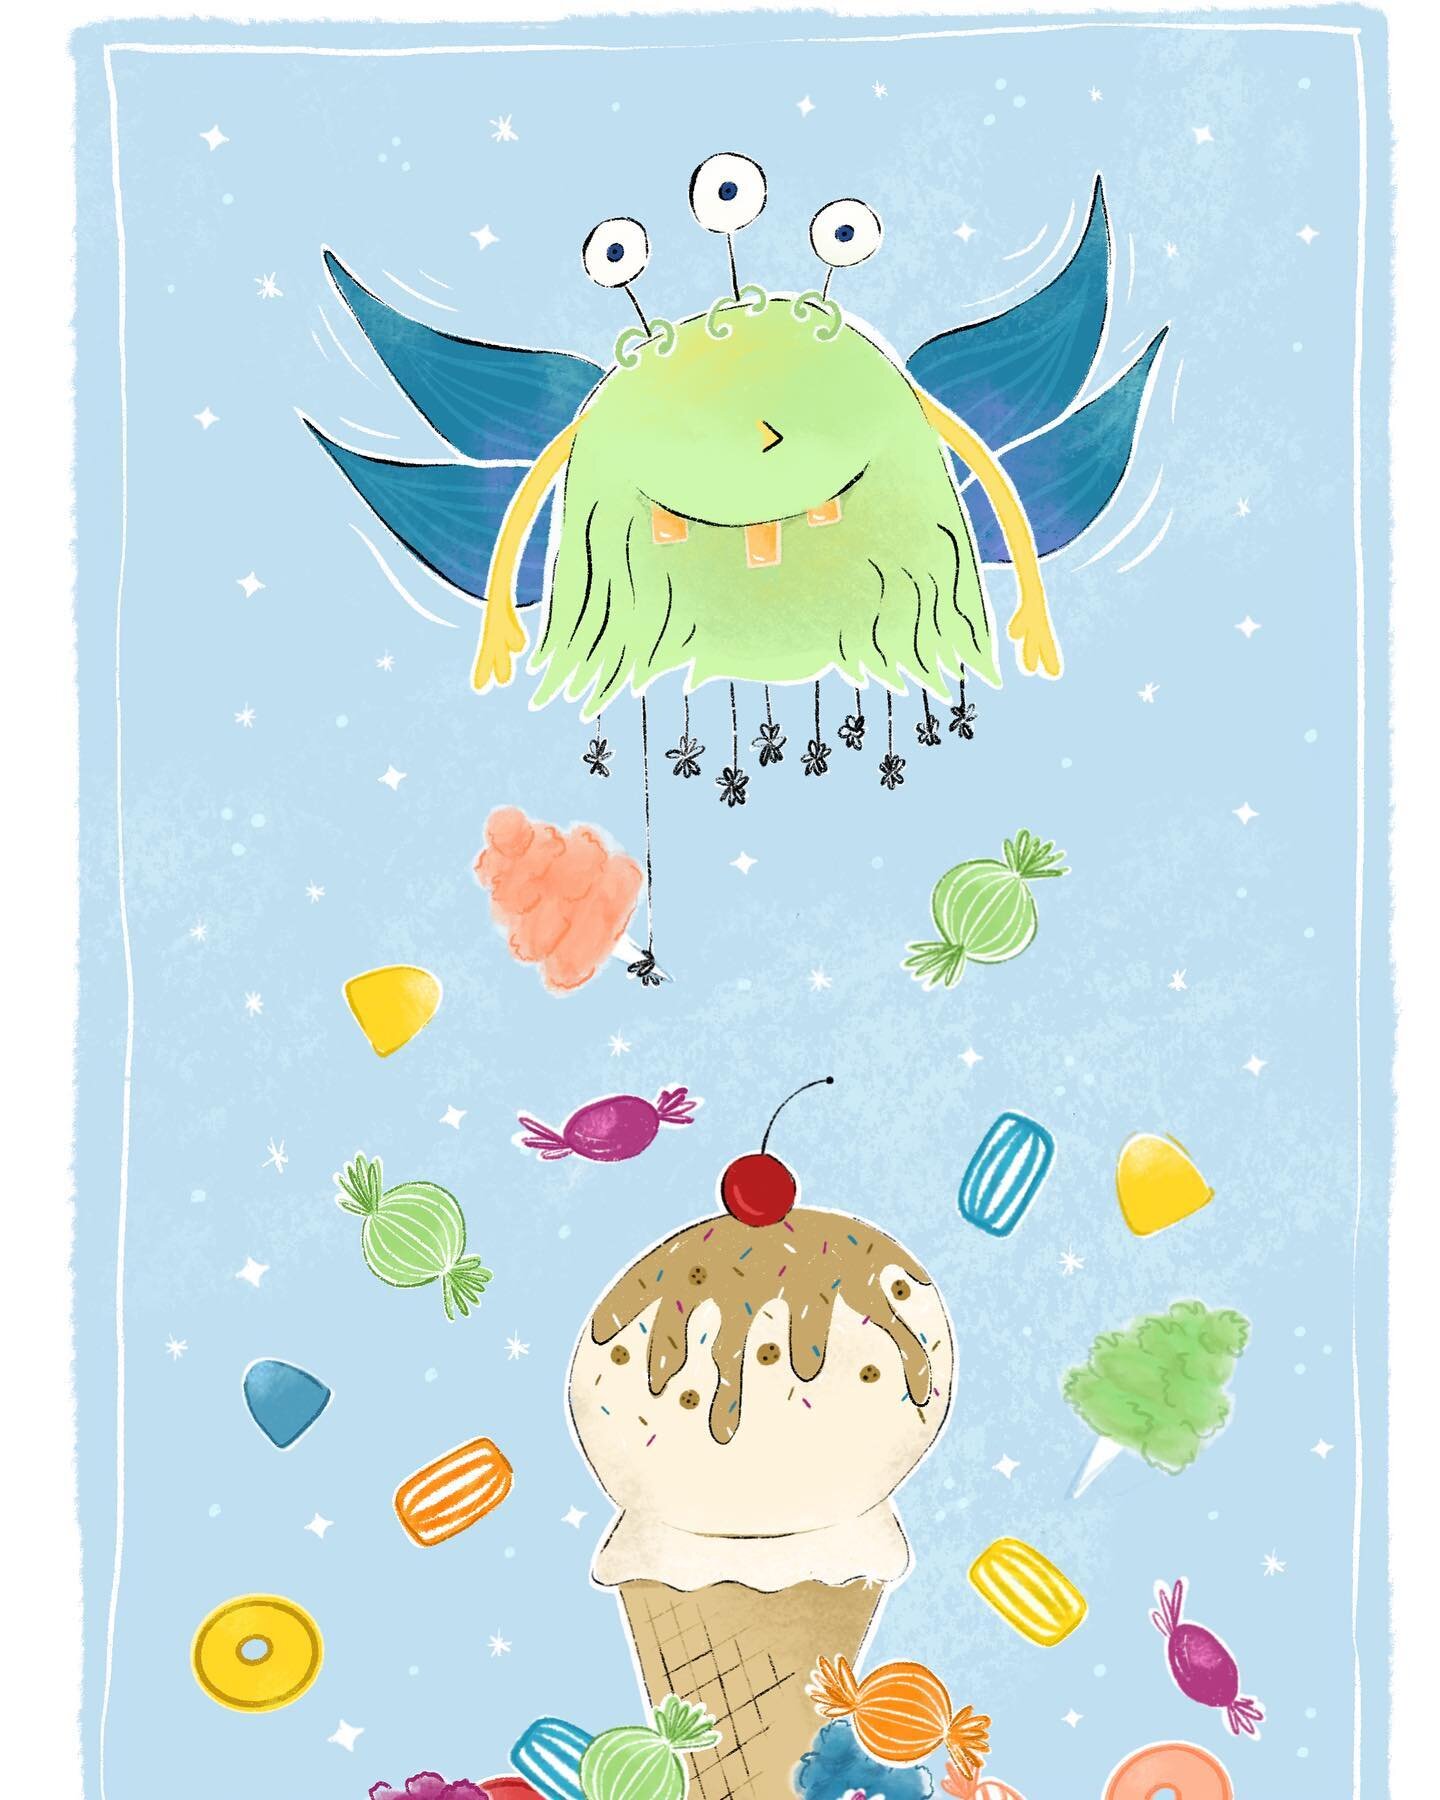 Cotton candy. All kiddos love candy. And so do monsters. #monsterproject